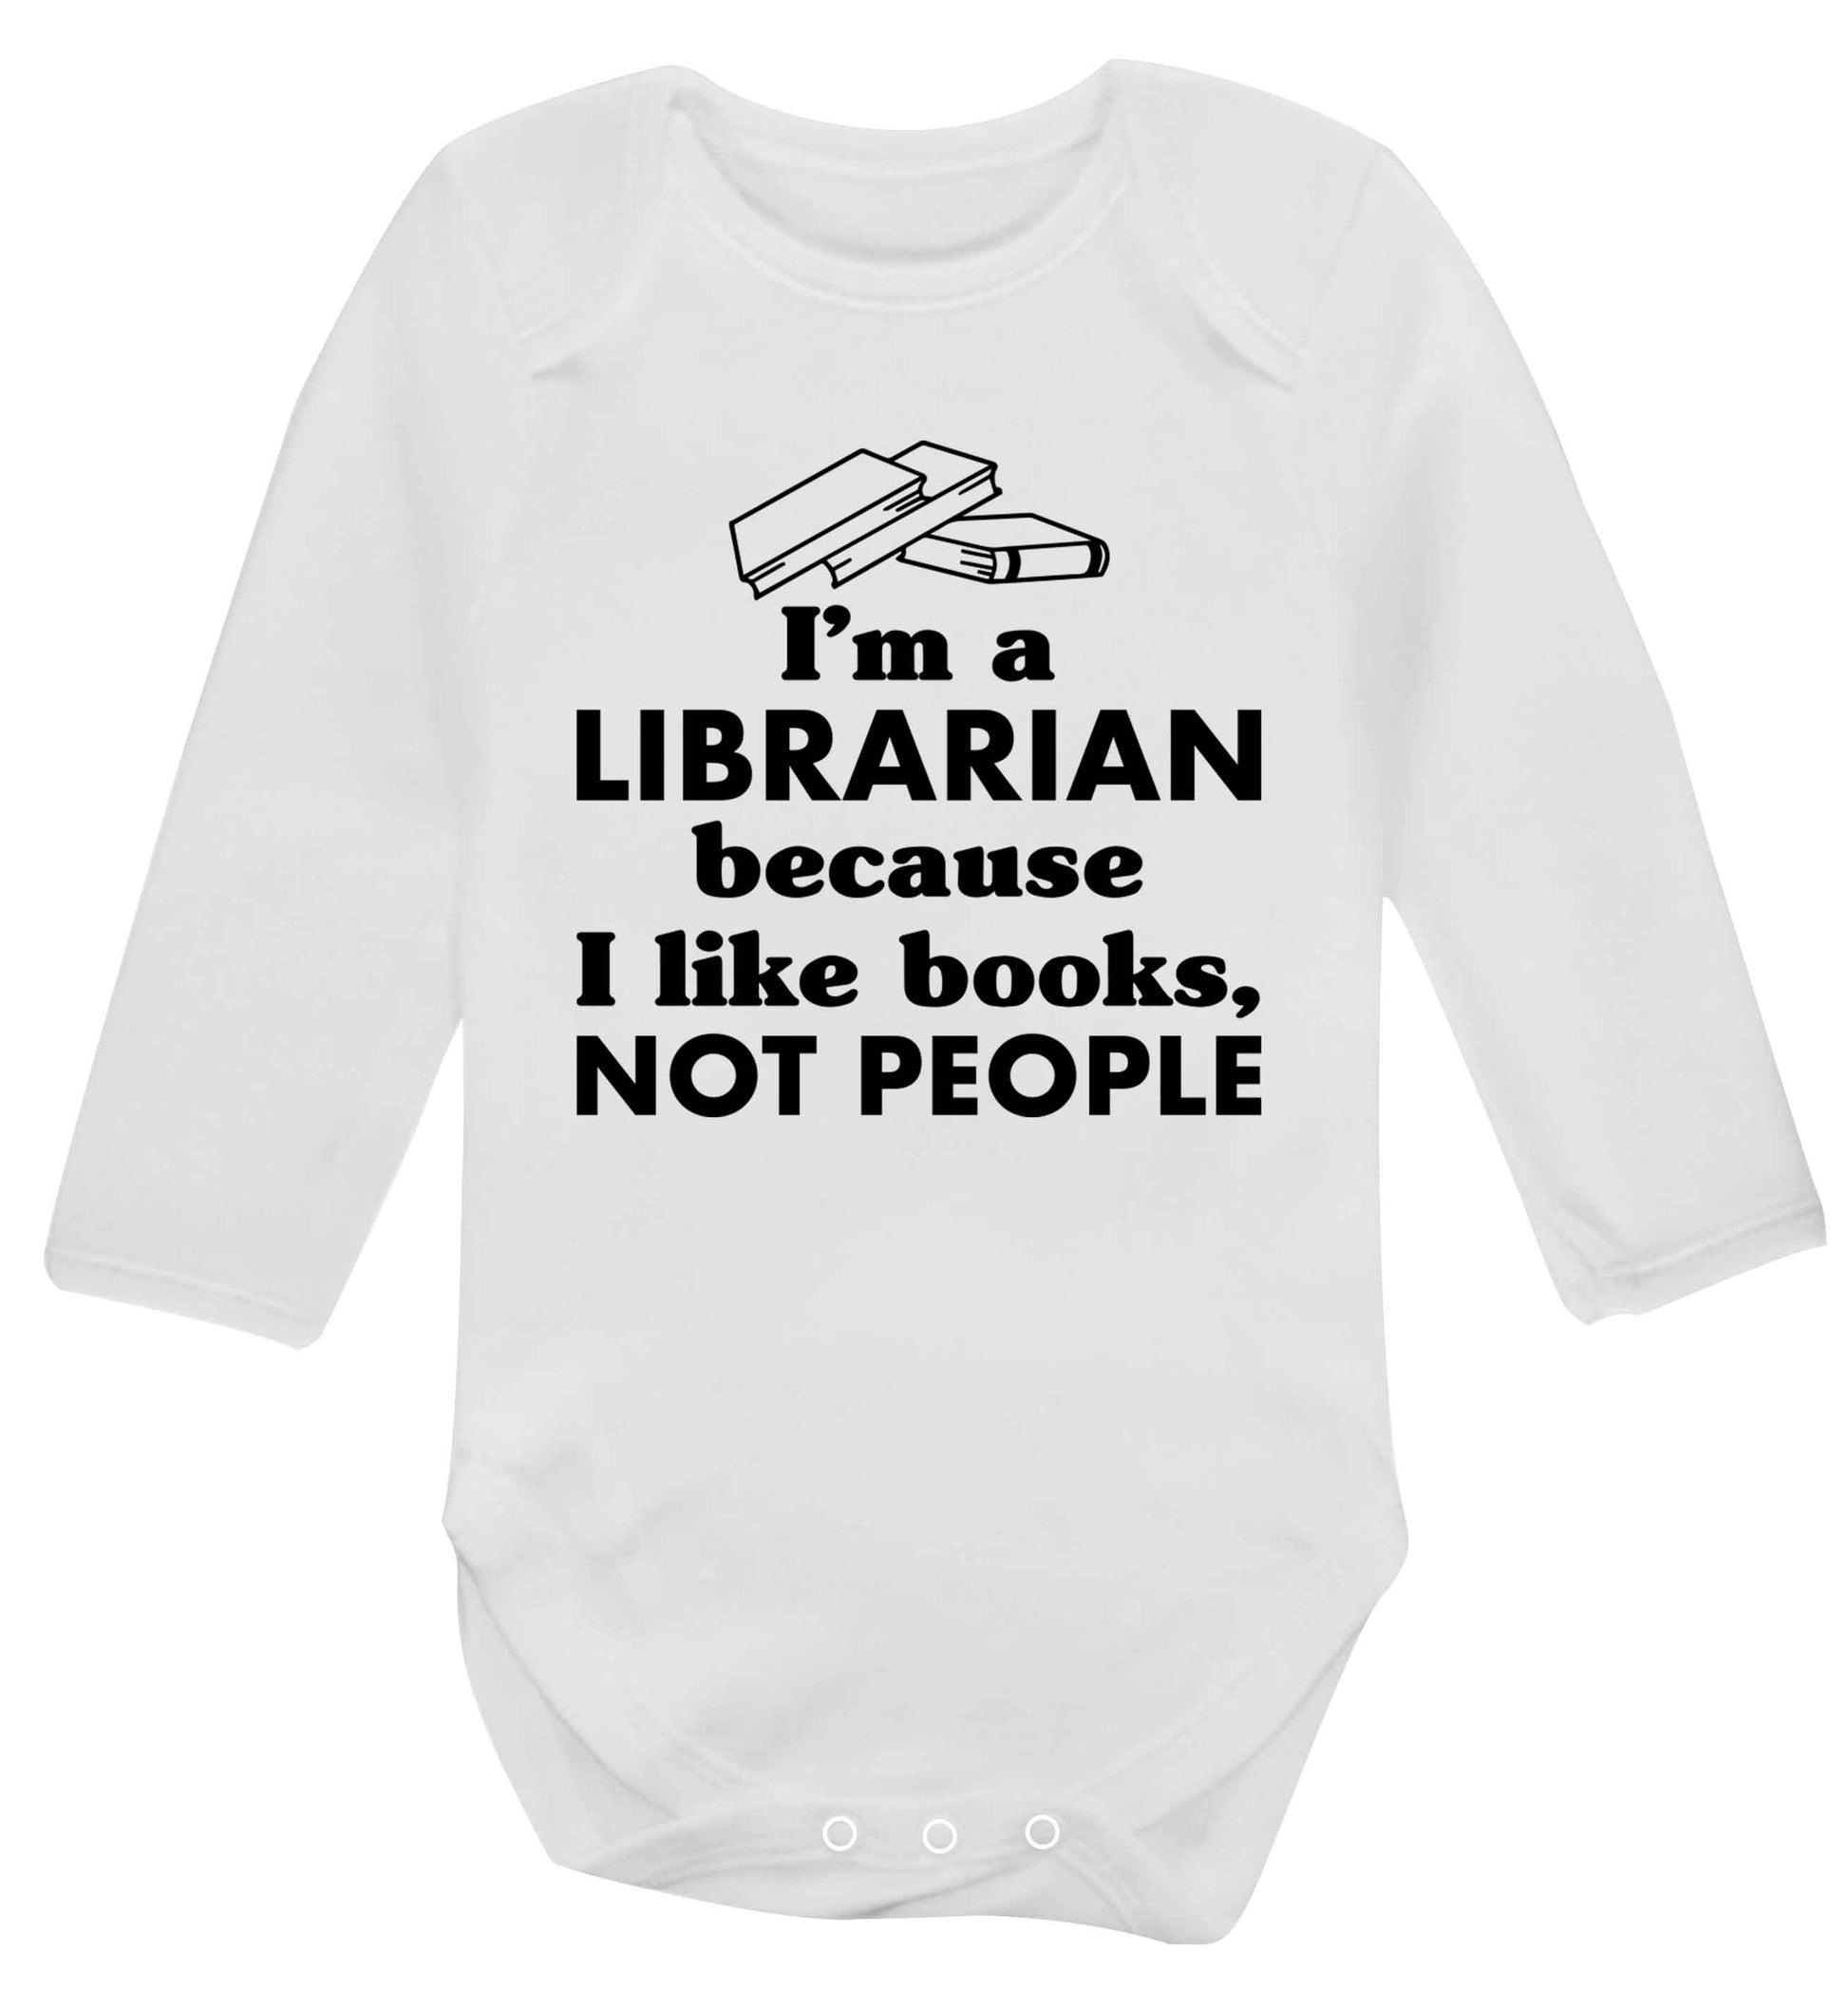 I'm a librarian because I like books not people Baby Vest long sleeved white 6-12 months